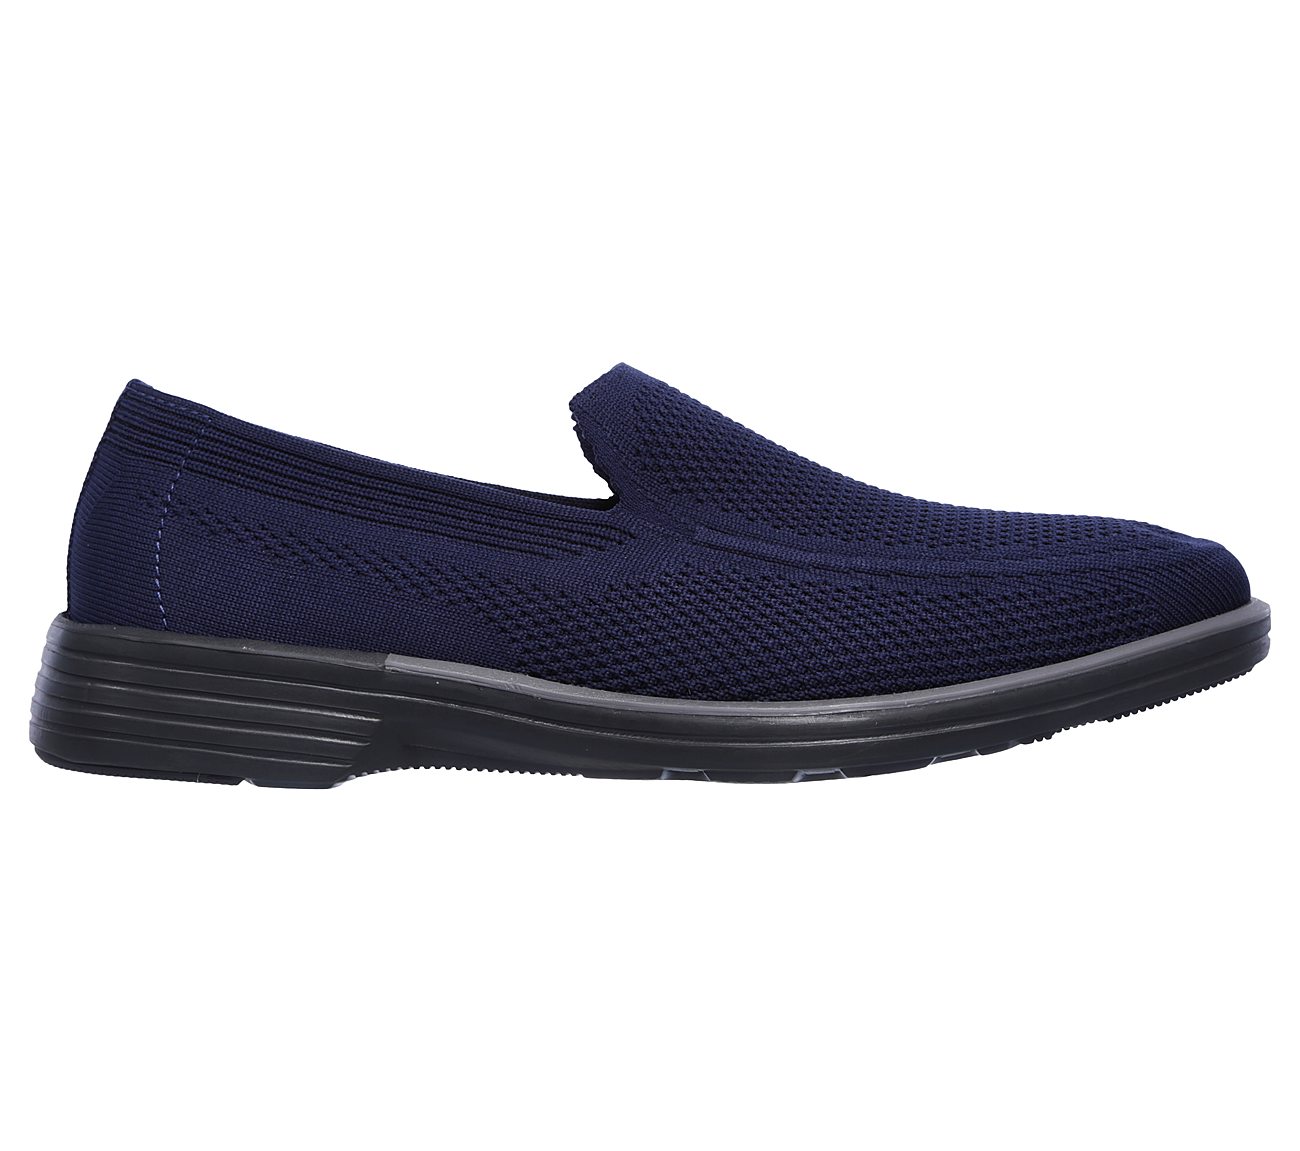 Buy SKECHERS Relaxed Fit: Walson - Morado Relaxed Fit Shoes only $80.00